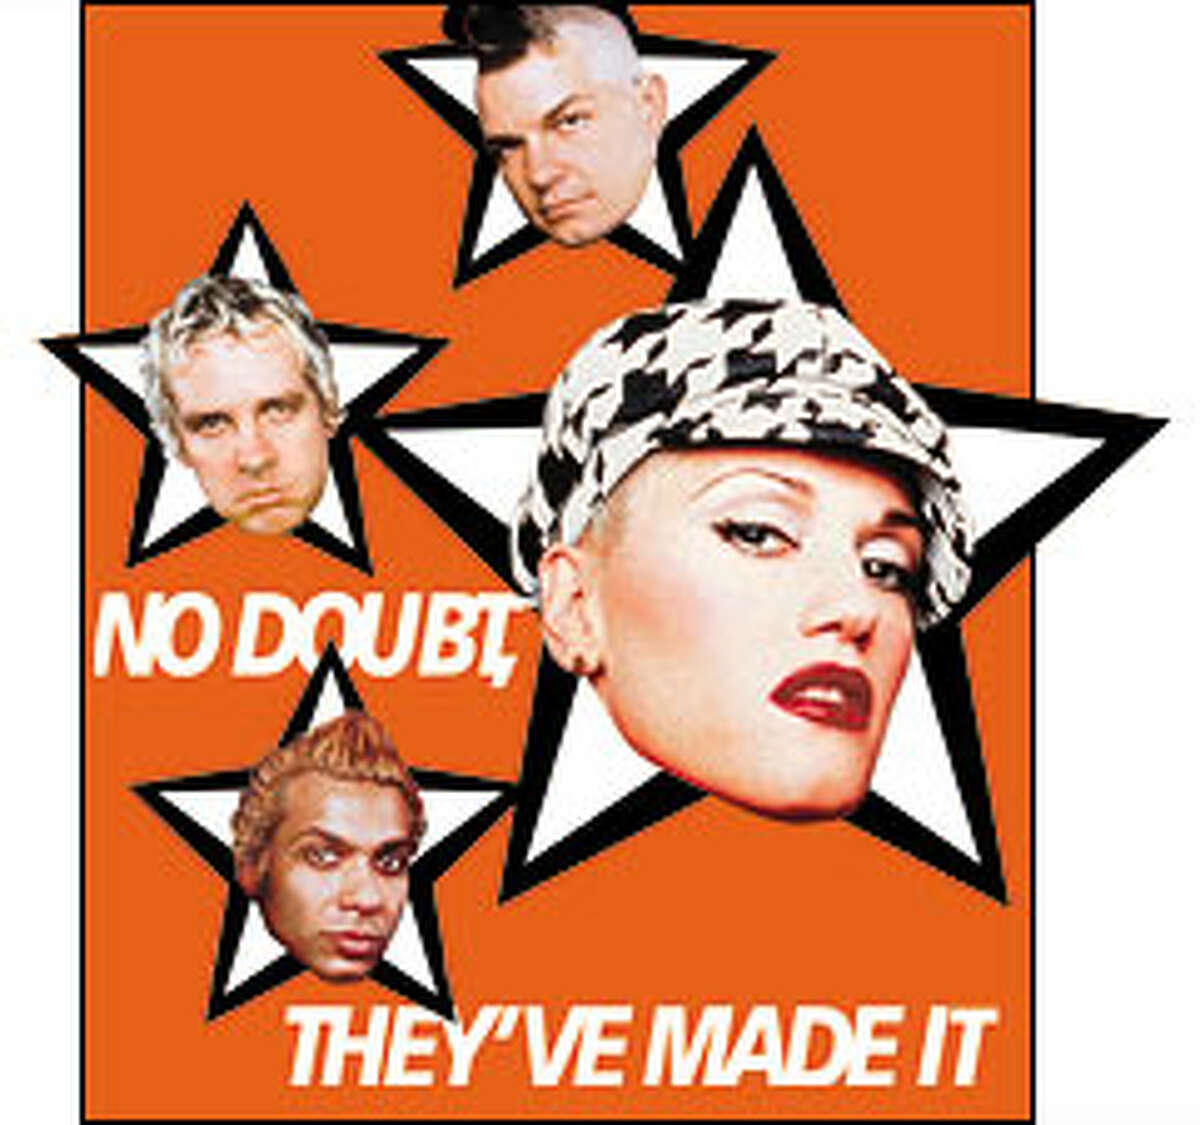 No Doubt, from top: Adrian Young, Tom Dumont, Gwen Stefani and Tony Kanal.